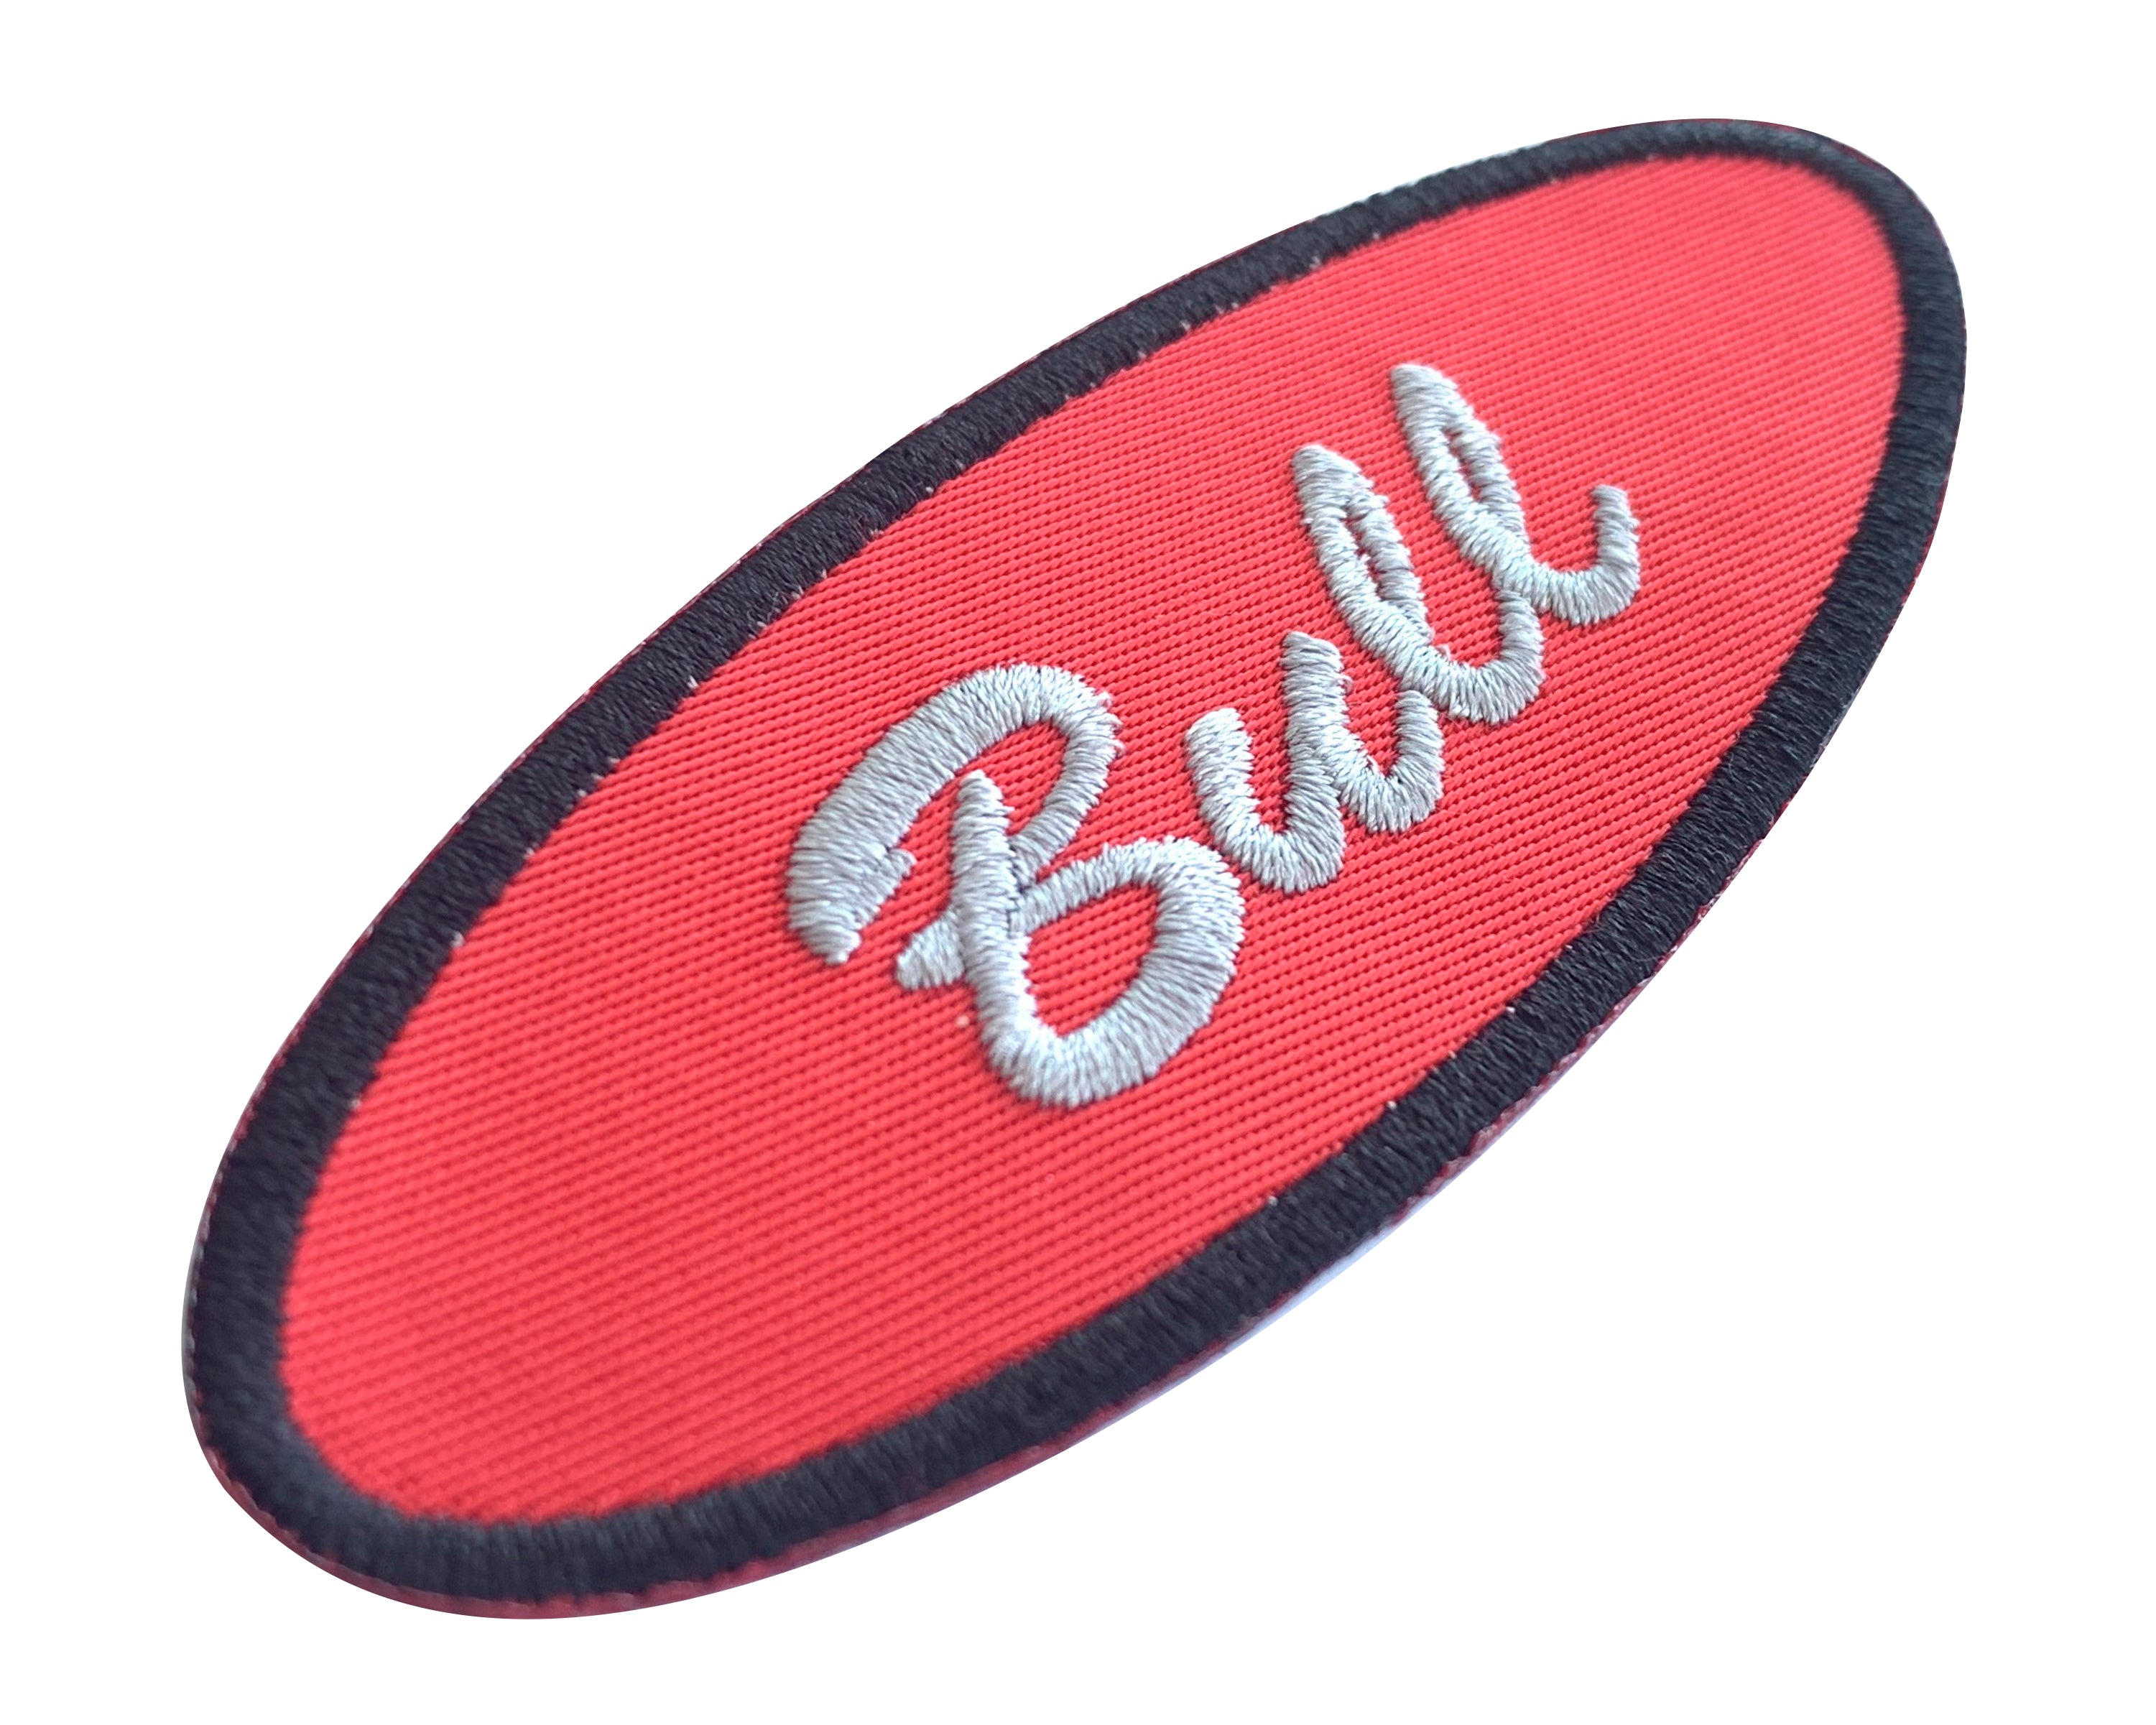 Embroidered Iron on / Velcro Name Patch. 